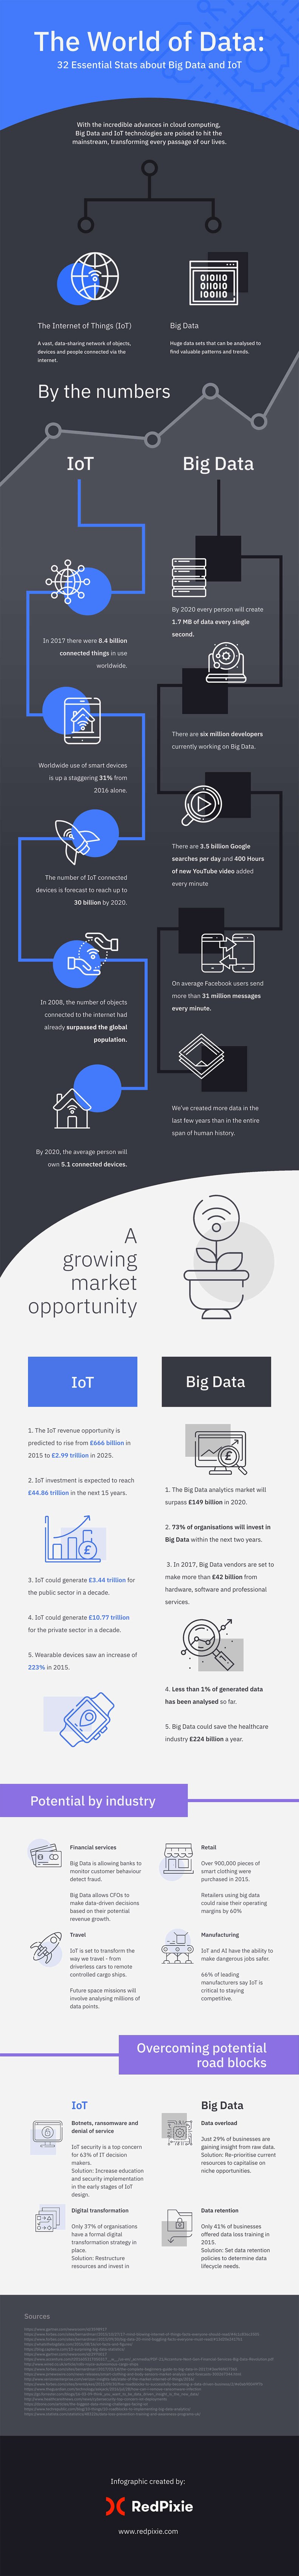 iot and big data infographic